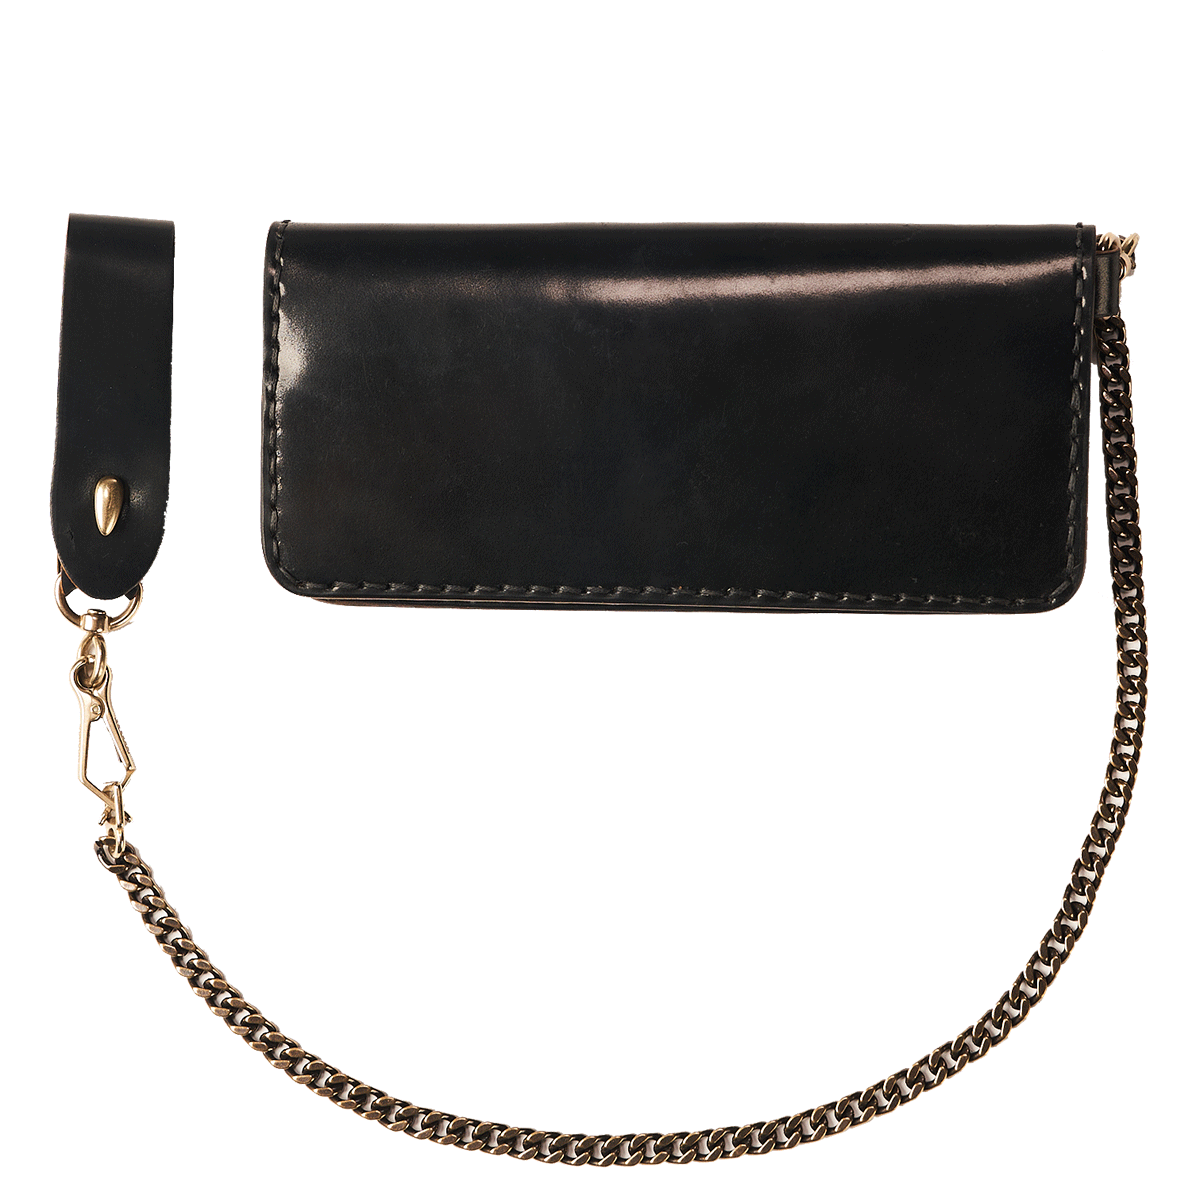 Horween® Shell Chain Wallet No.9